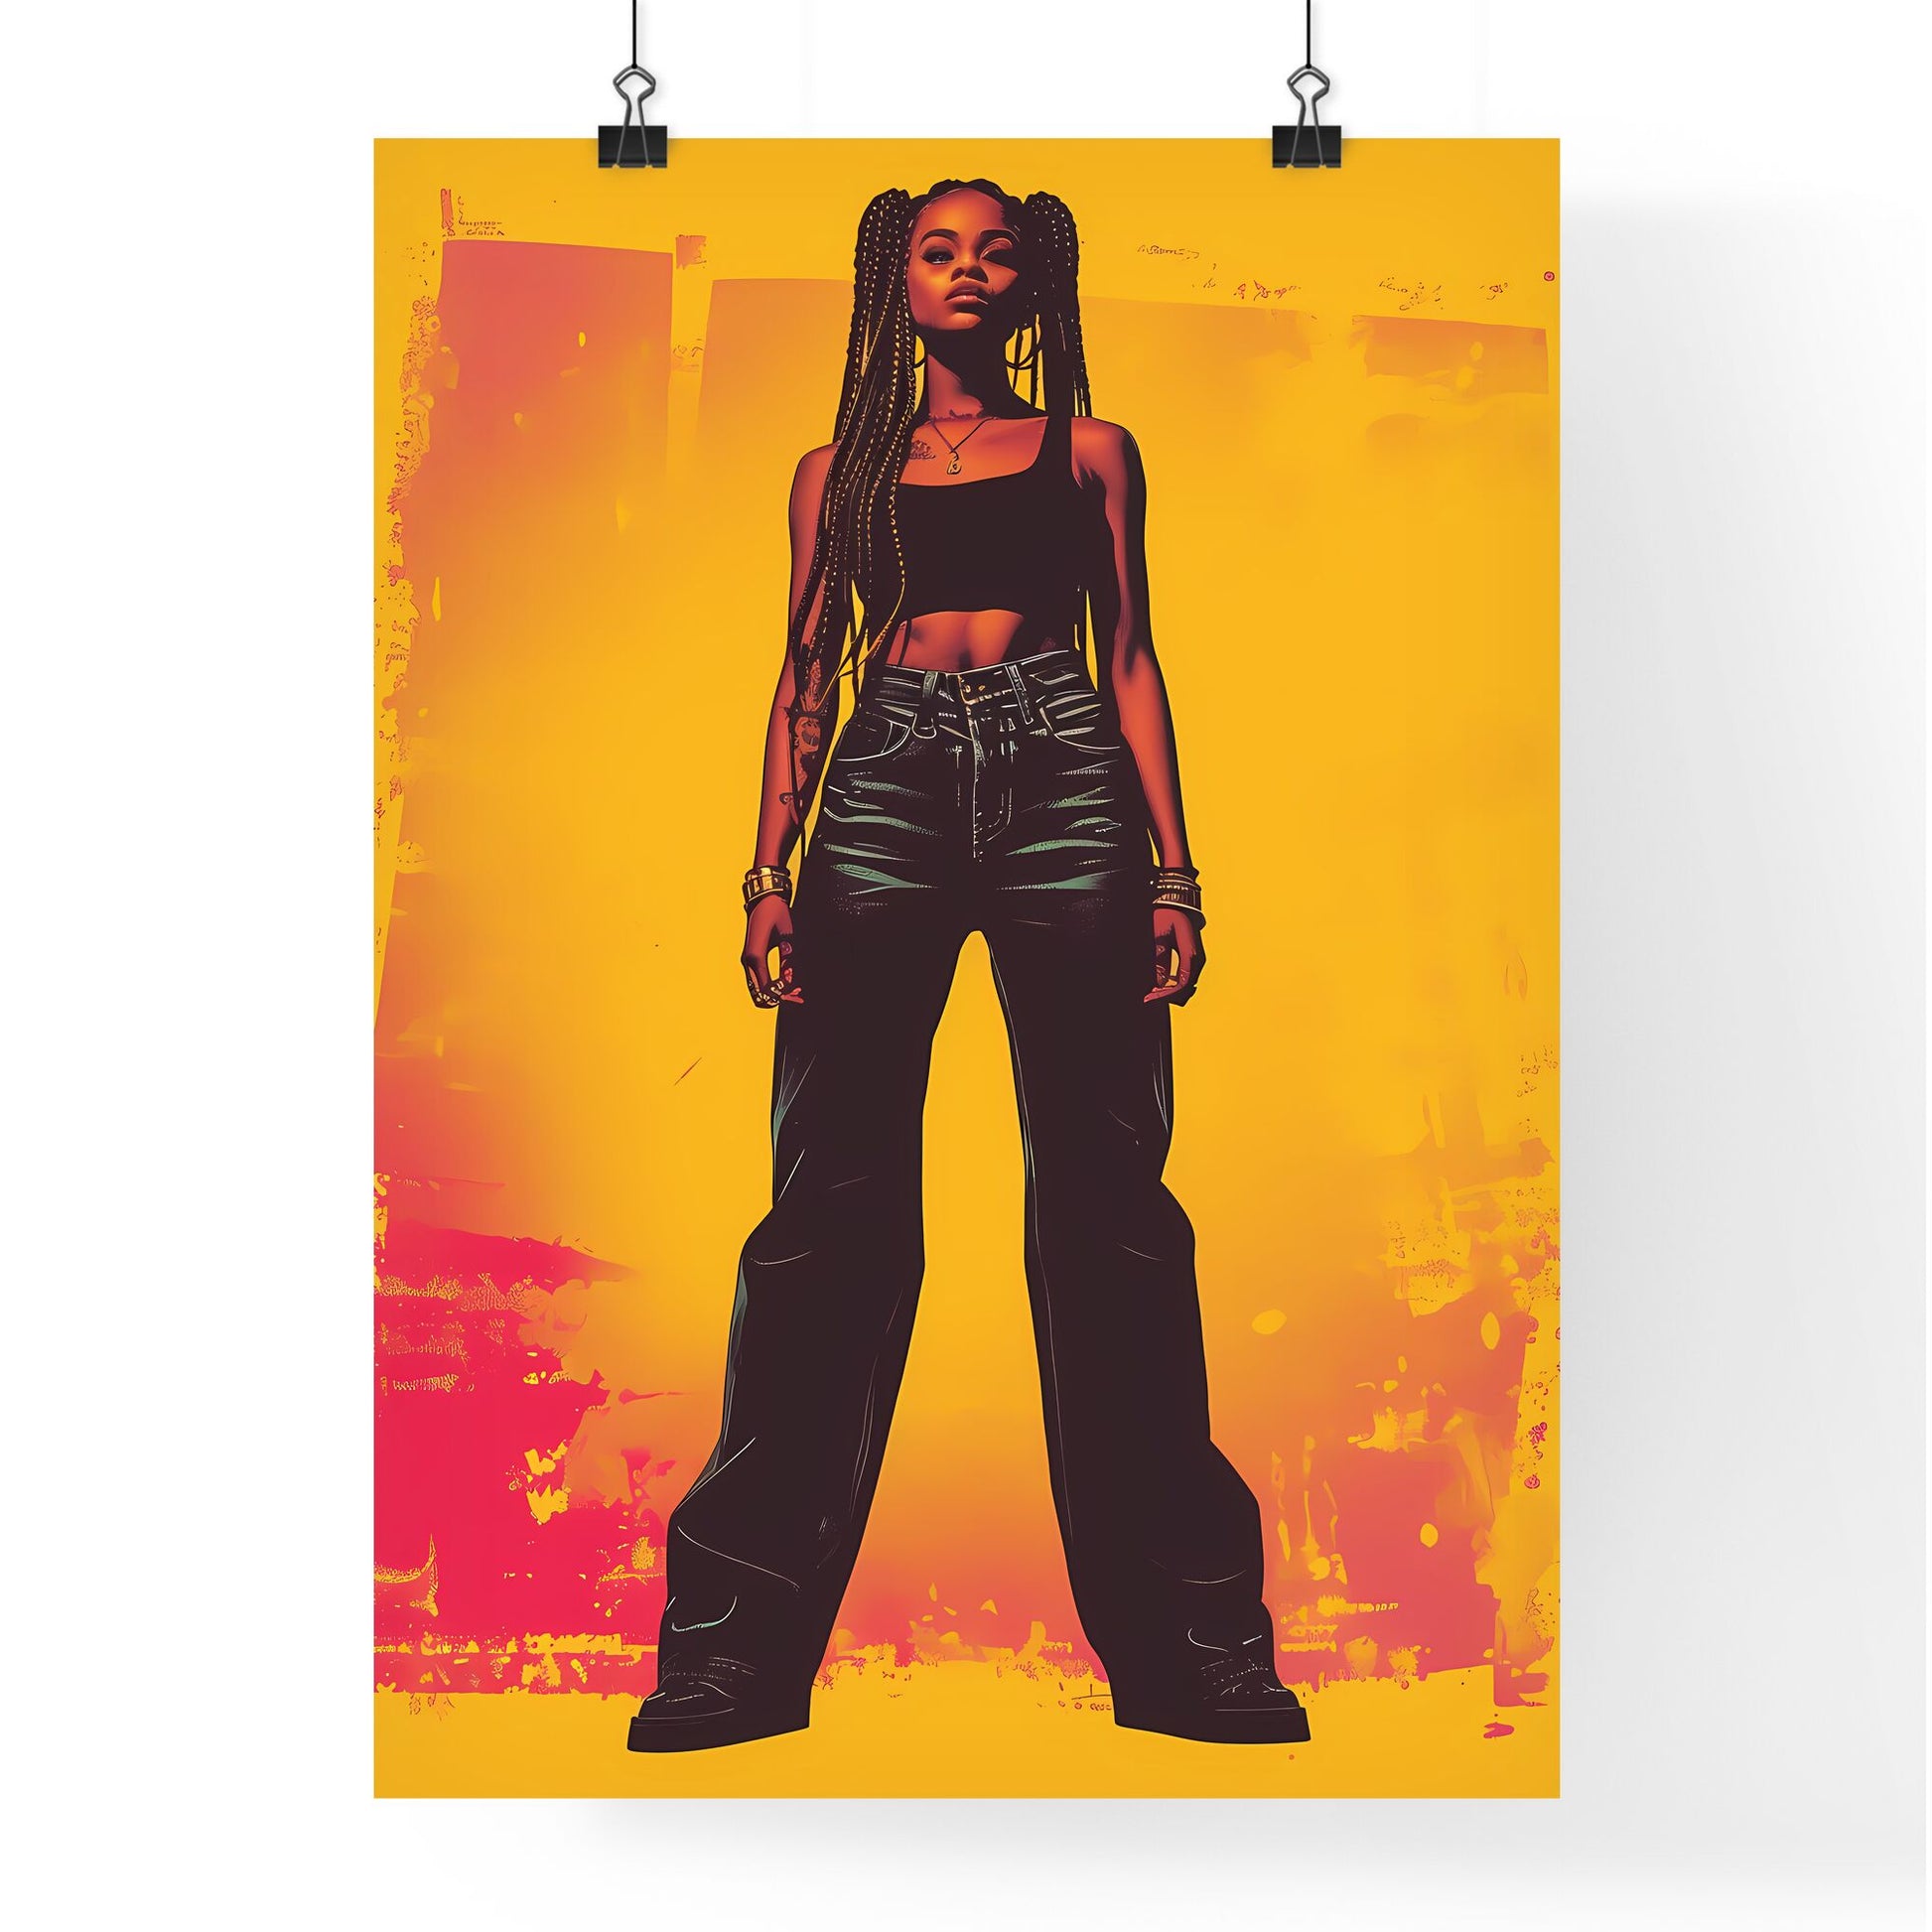 A standing woman, listining a music illustrations vector design - Art print of a woman with long braids wearing black pants and a tank top Default Title